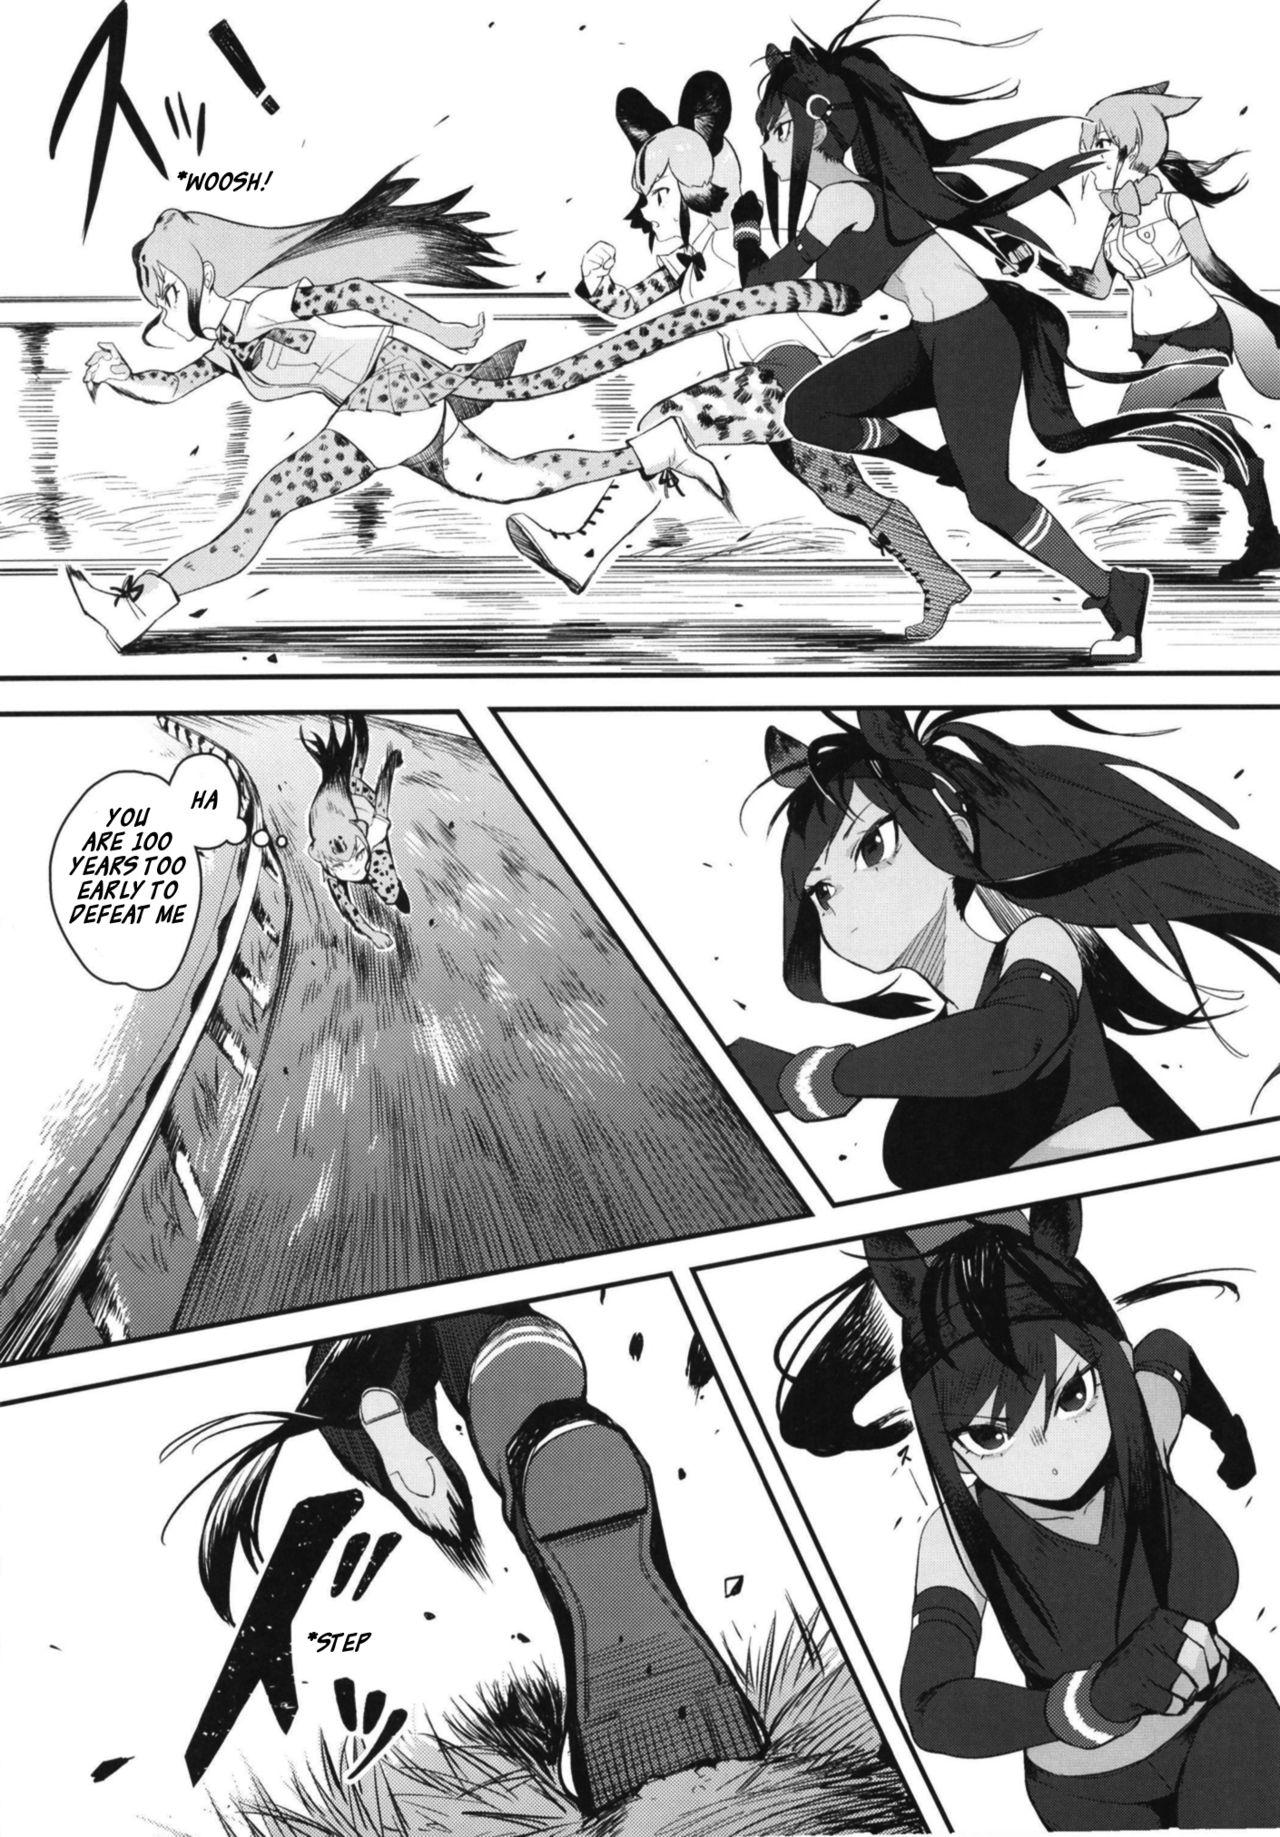 Amature Porn Thoroughbred Early Days 2 - Kemono friends Fucking Sex - Page 4